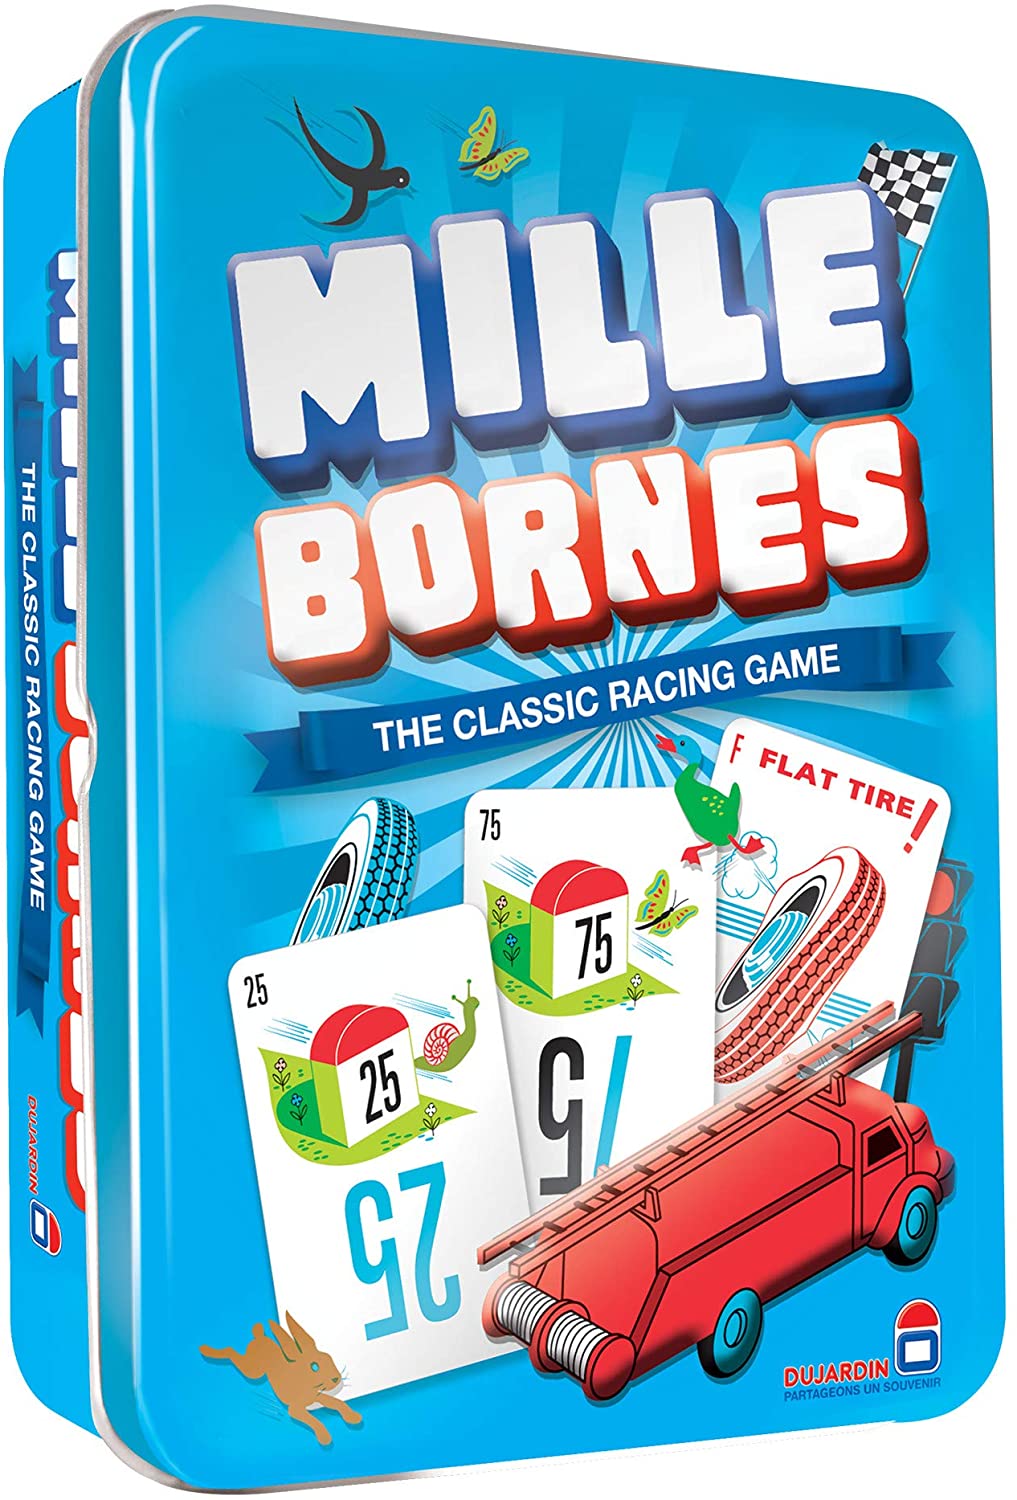 Mille Borne - Accessibility Kit (1000 miles) – 64 Ounce Games